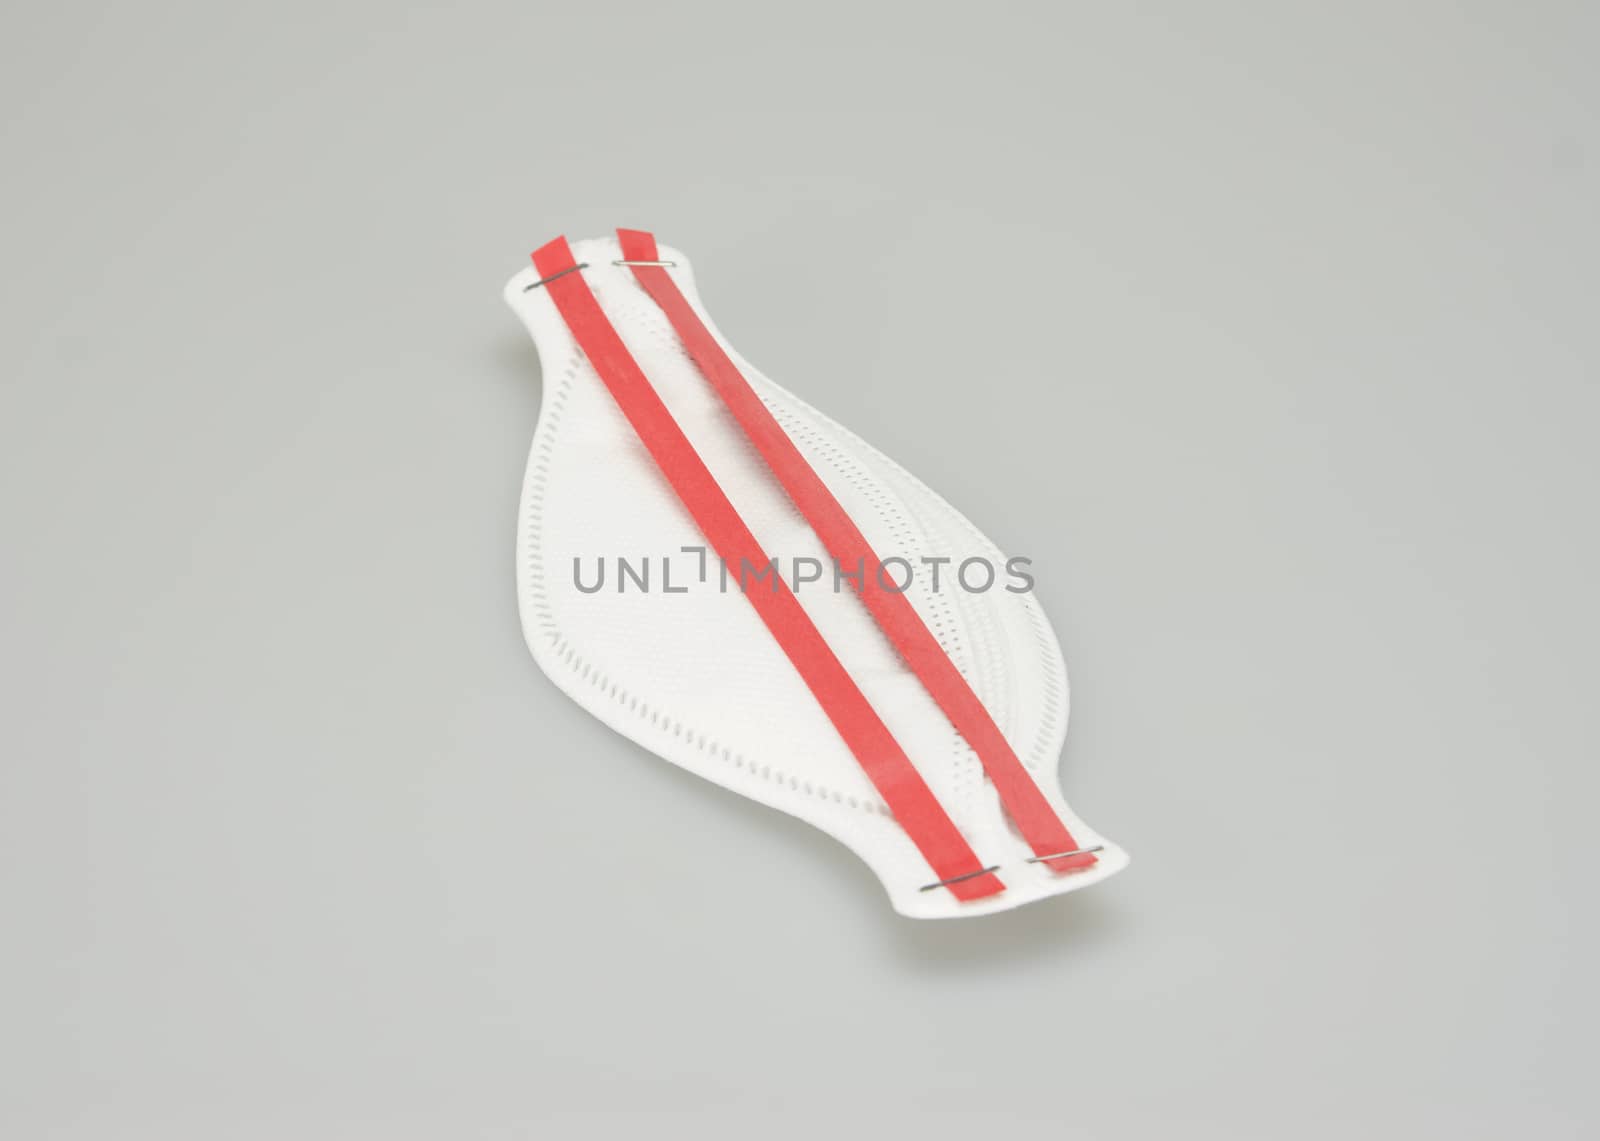 The N95 mask, oval shape, ear hook have red belt placed on white background.